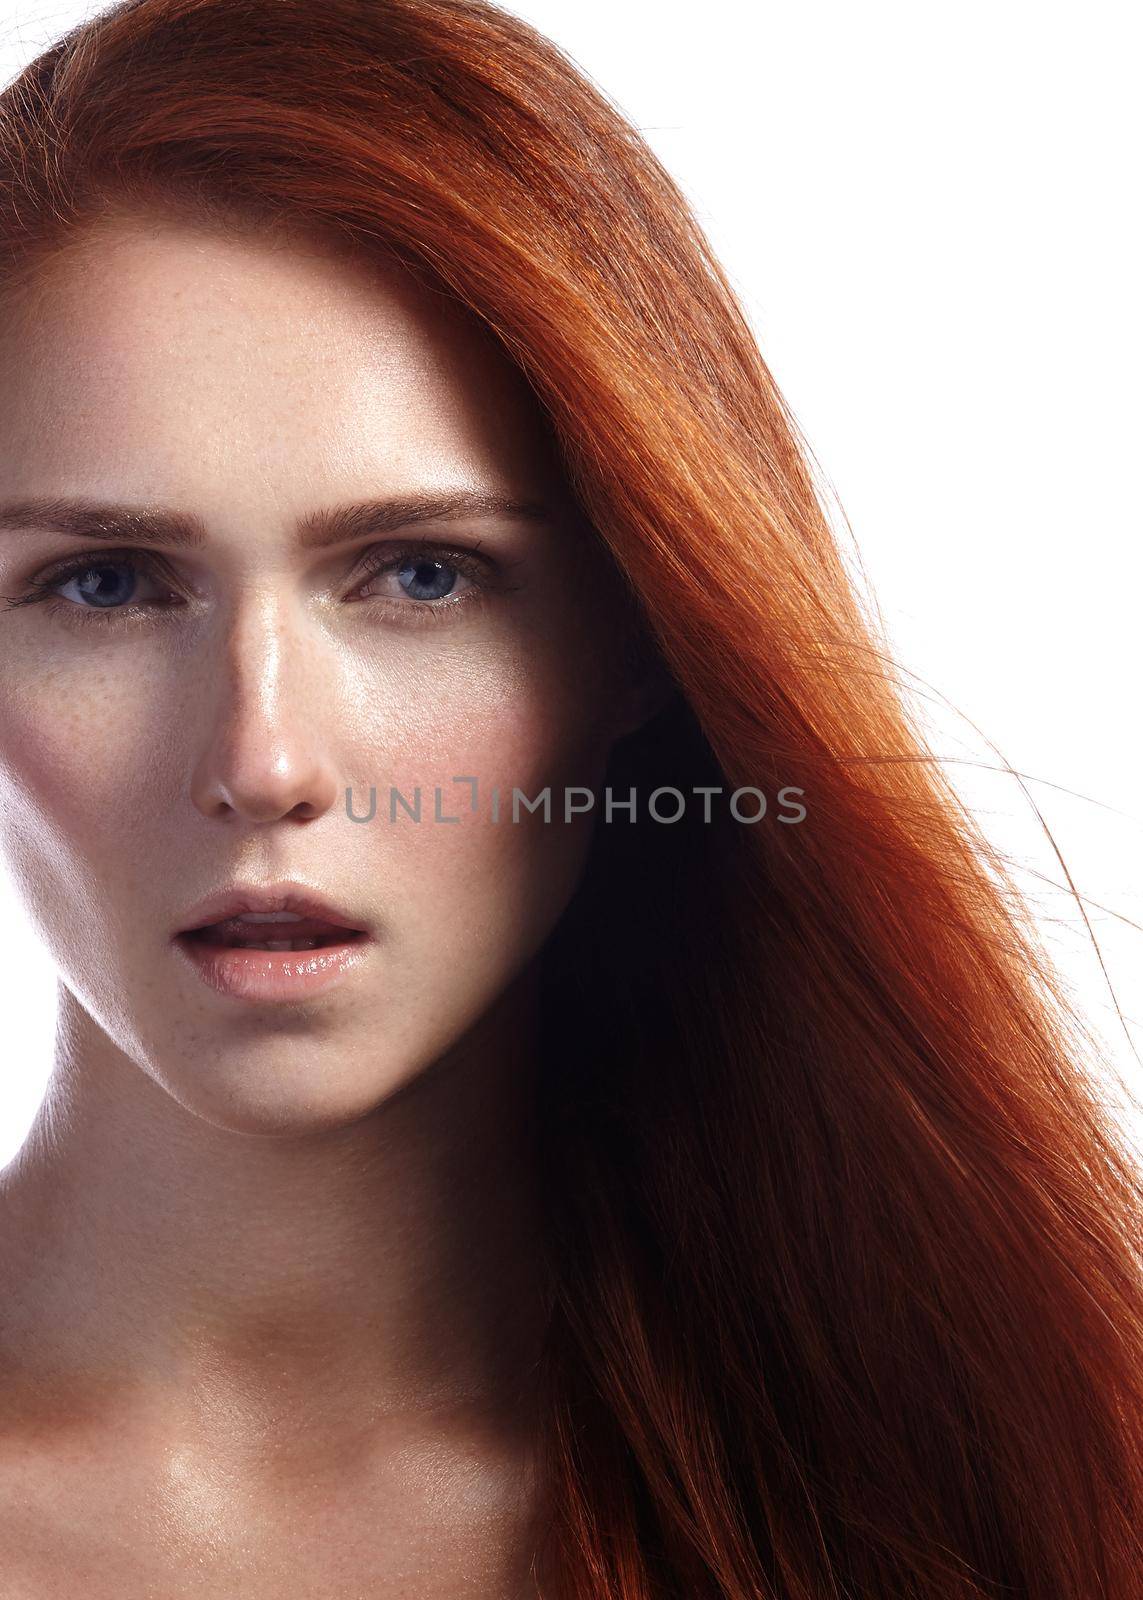 Beautiful ginger young woman with flying hair and naturel makeup. Beauty portrait of sexy model with straight red hair. Long soft shiny hairstyle. Close-up studio shot o fashion look redhead girl